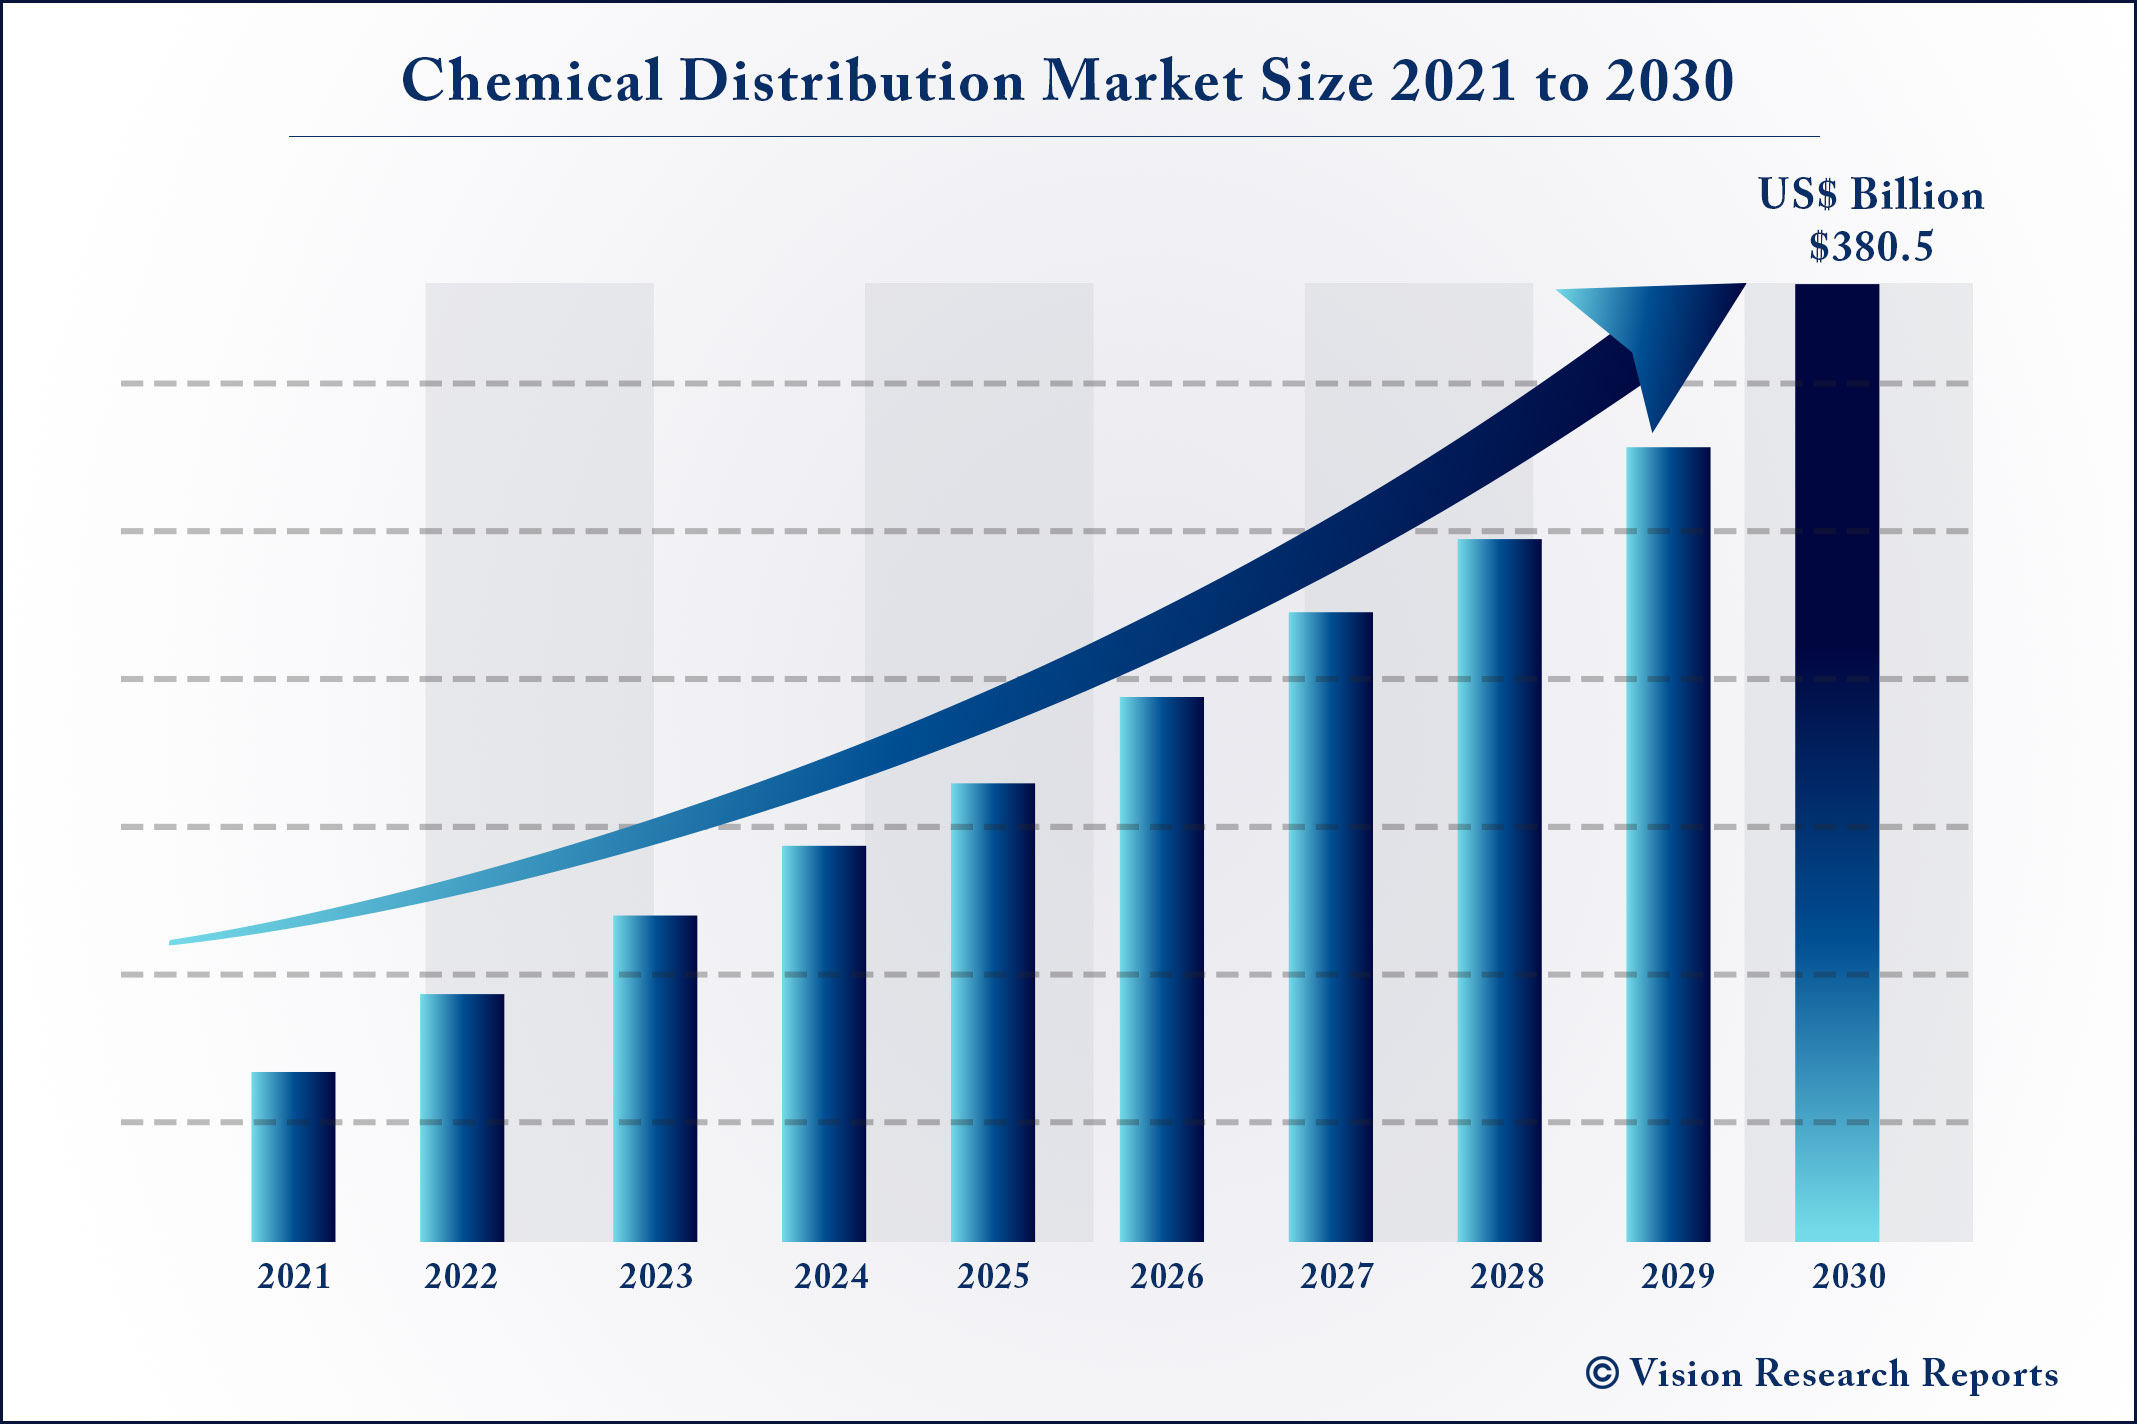 Chemical Distribution Market Size 2021 to 2030